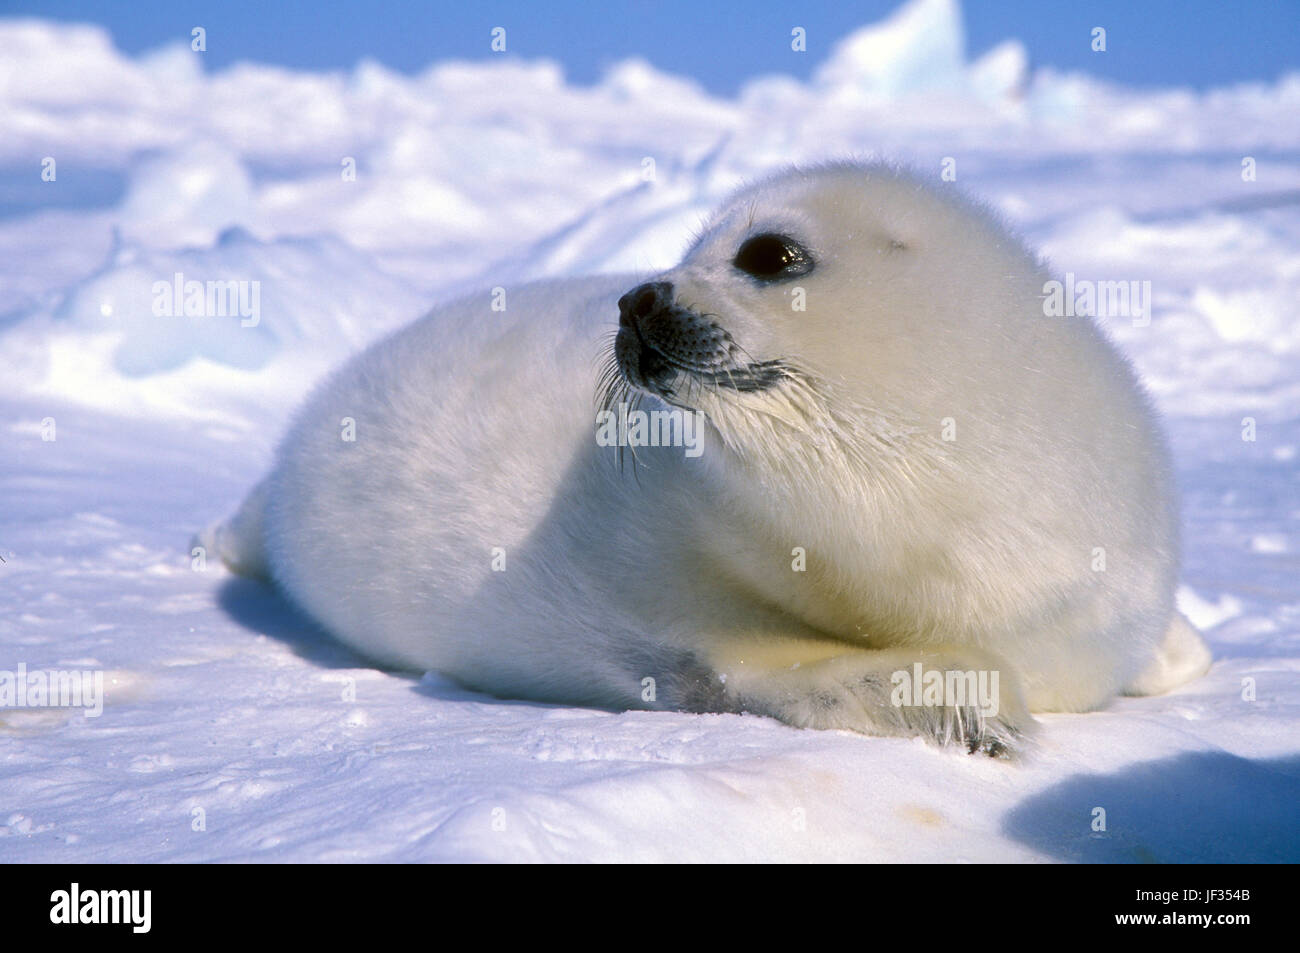 Harp seal pup (Phoca goenlandica) on the ice, Magdalen Islands, Canada. Pups are white only for a few weeks after birth. Stock Photo